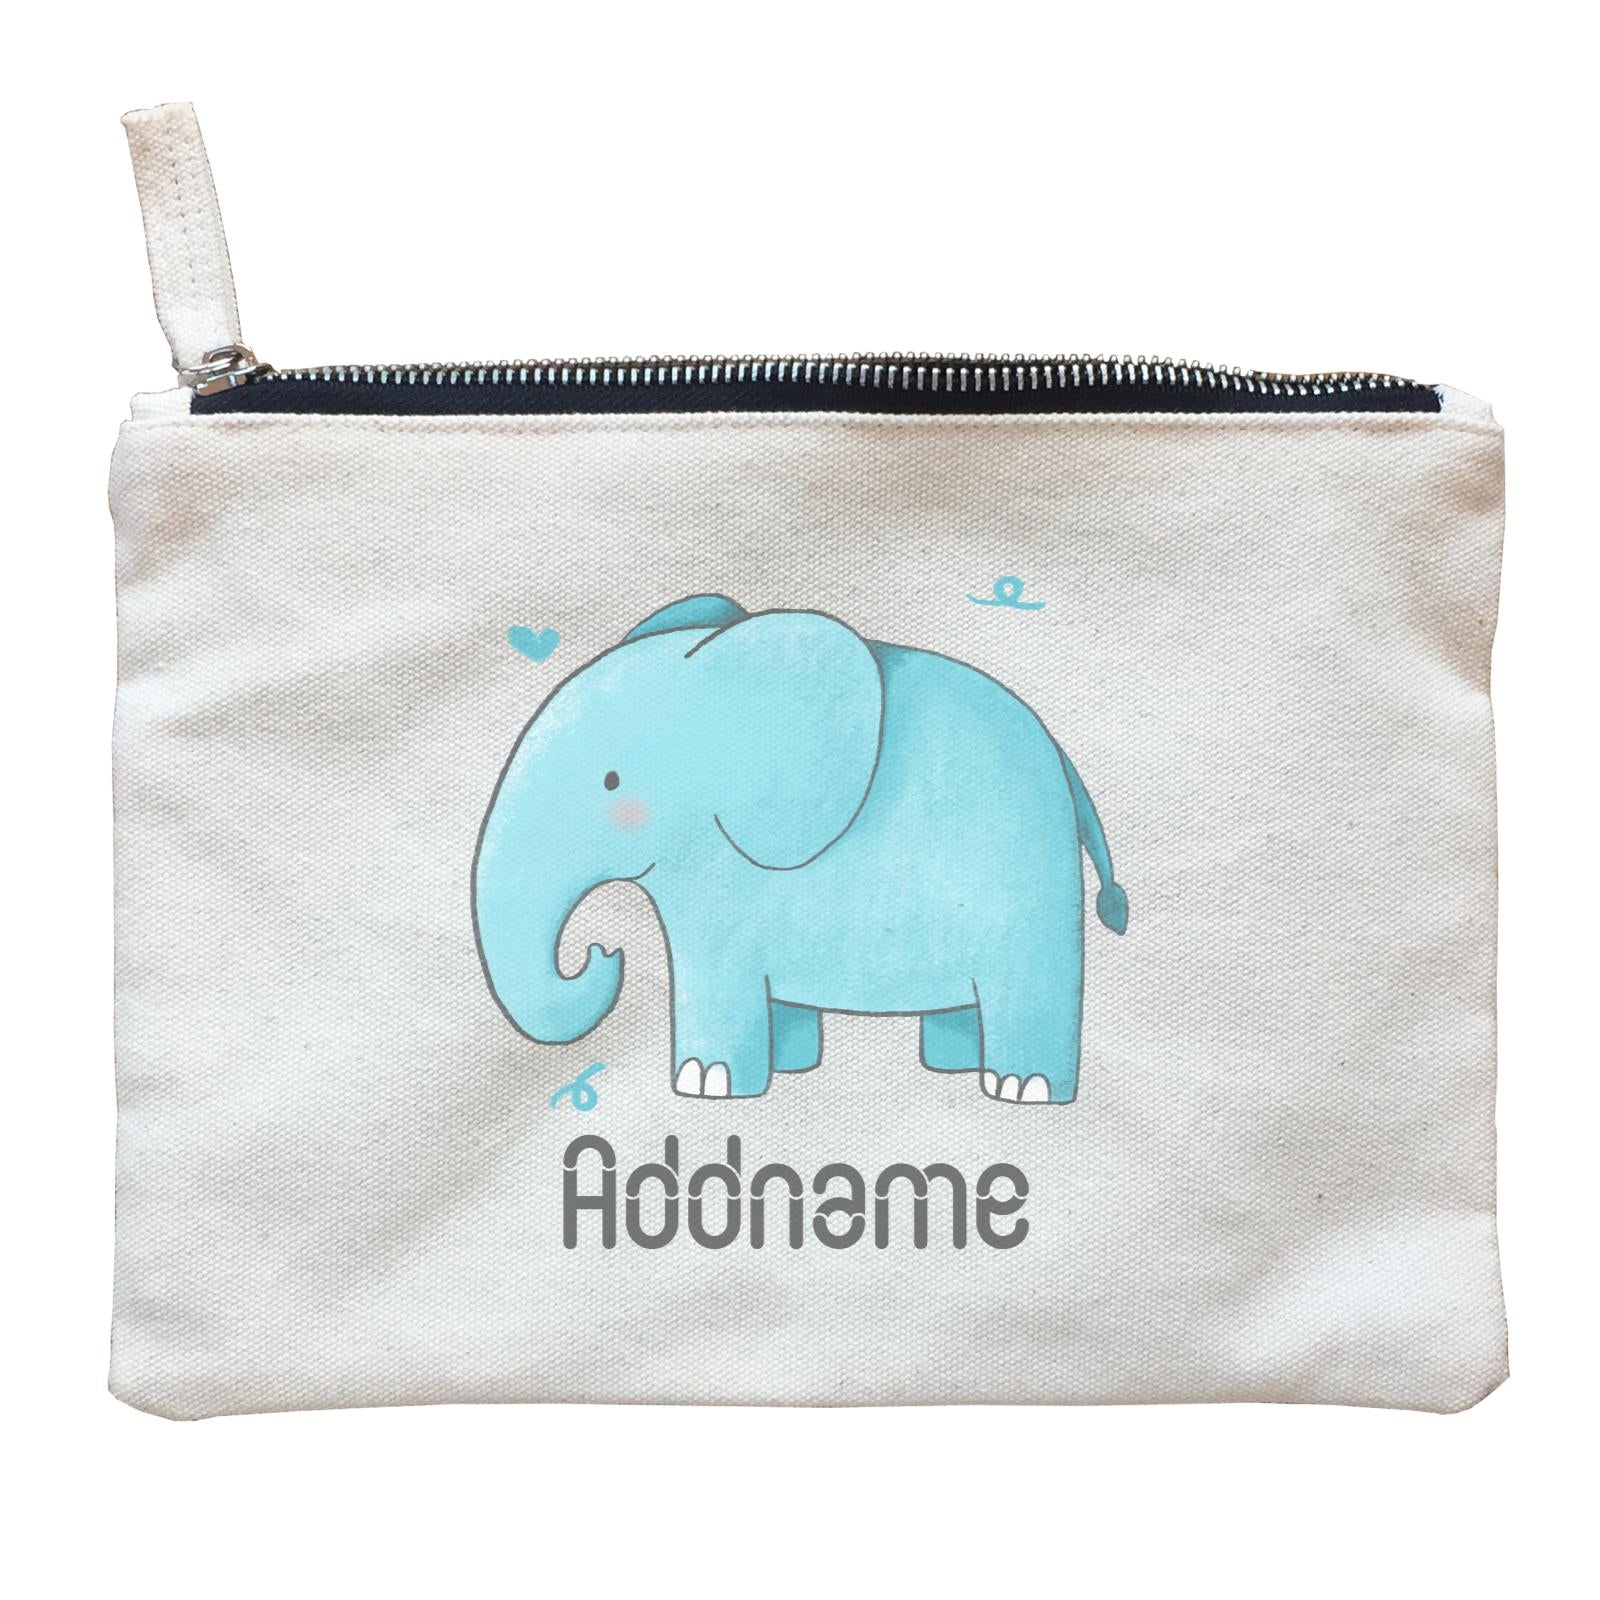 Cute Hand Drawn Style Elephant Addname Zipper Pouch